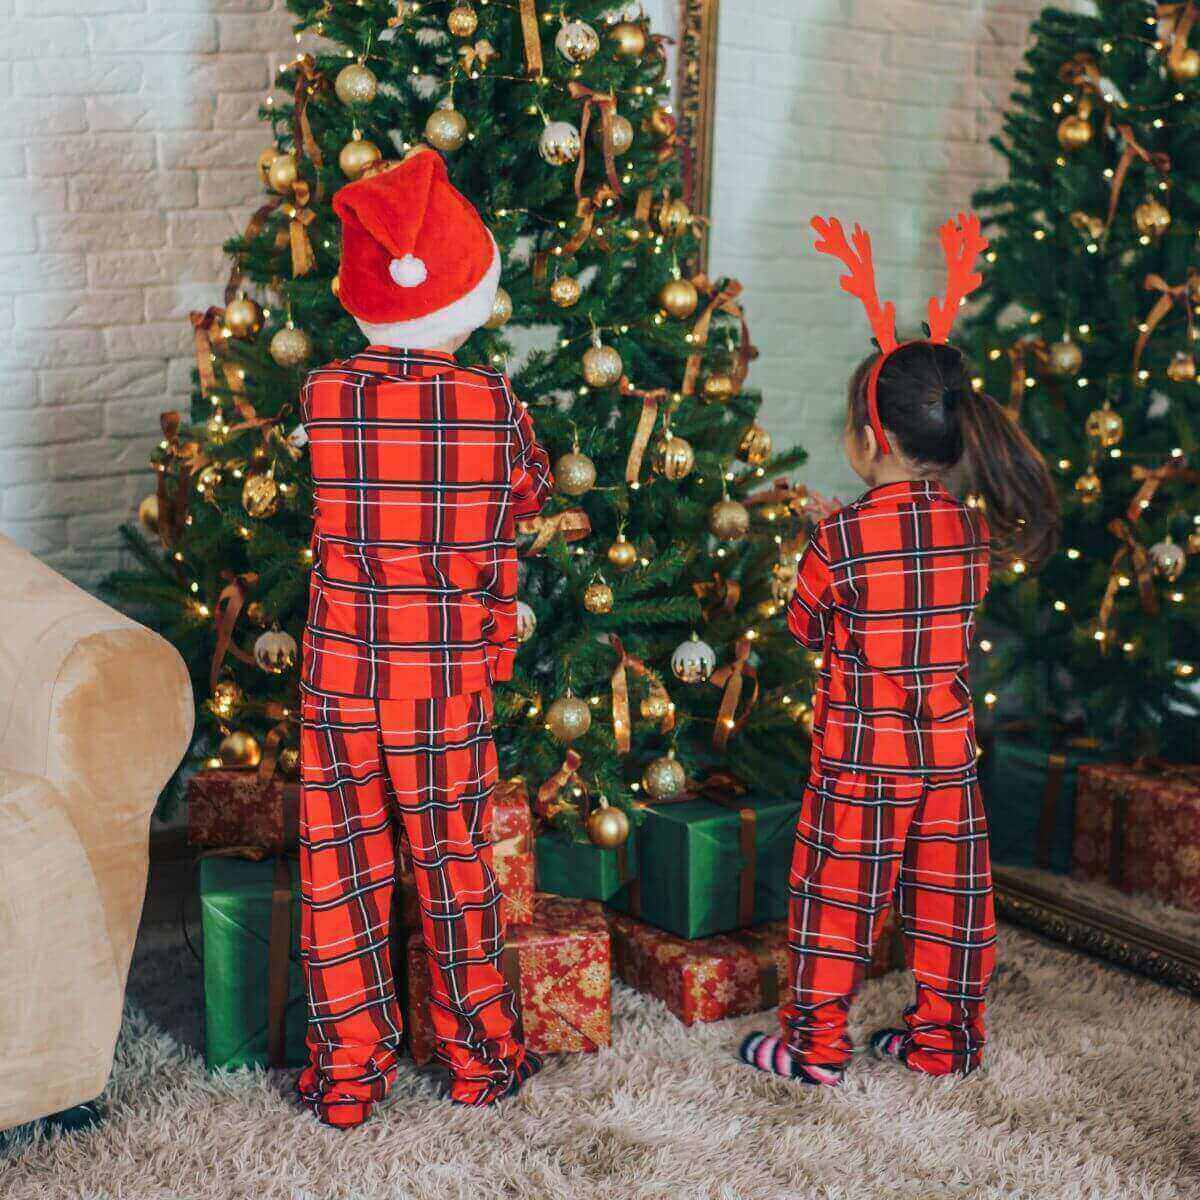 A boy and girl are standing in front of a Christmas tree. Their backs are to the camera. Both are wearing red, black, and white plaid pajamas that match. The boy is wearing a Santa hat and the girl is wearing reindeer ears.